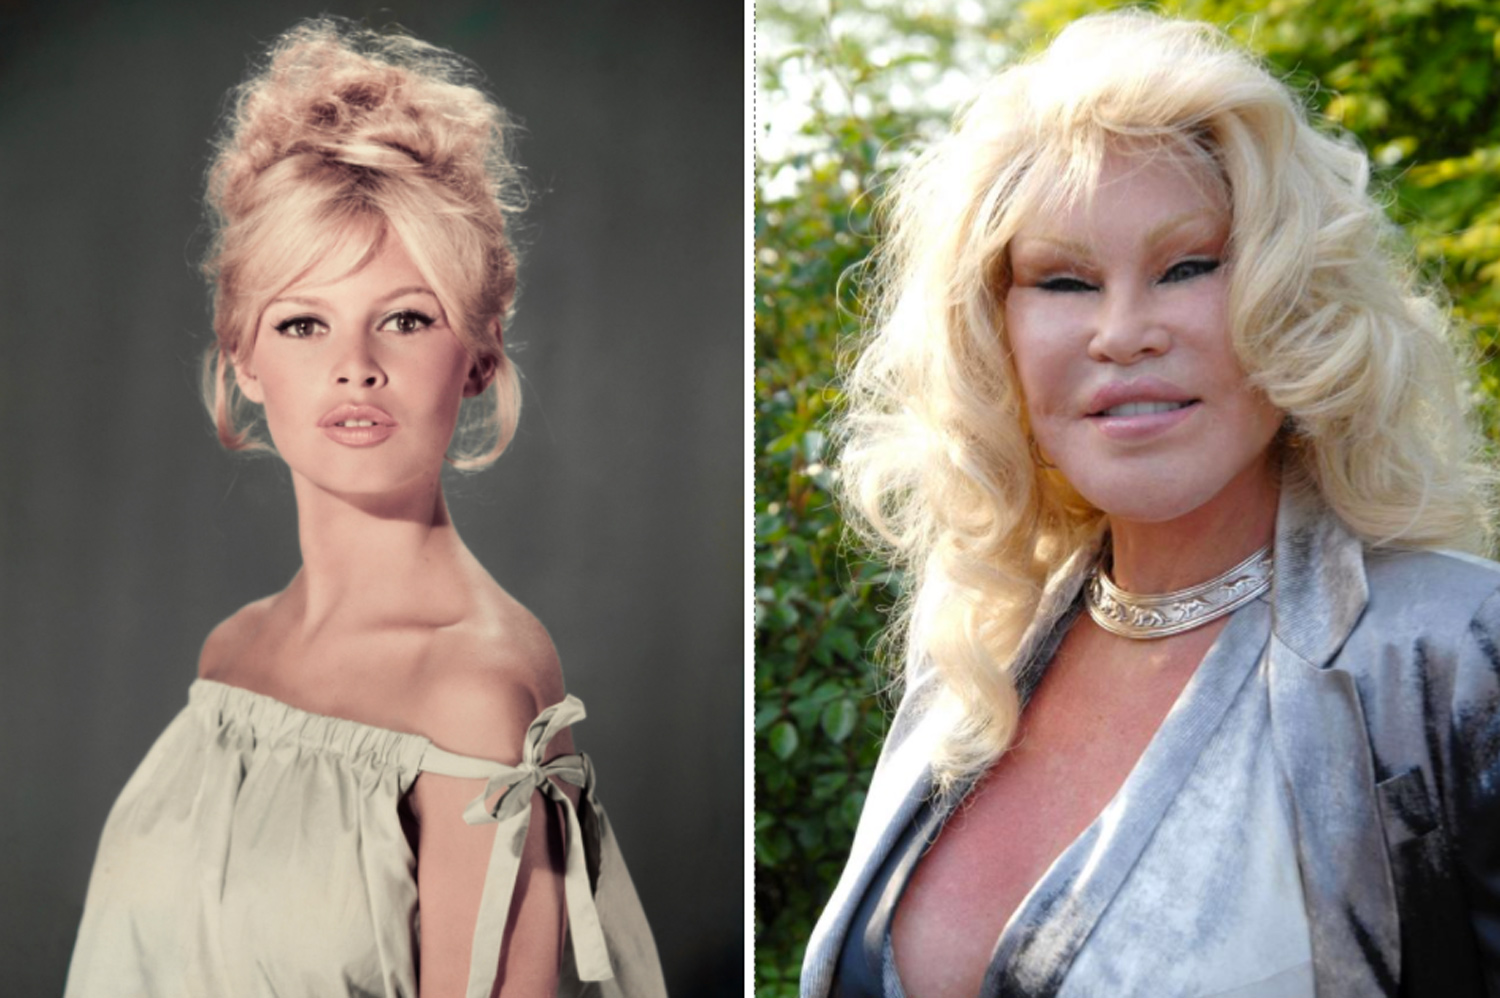 Jocelyn claims to often be compared to Brigitte Bardot (pictured left)